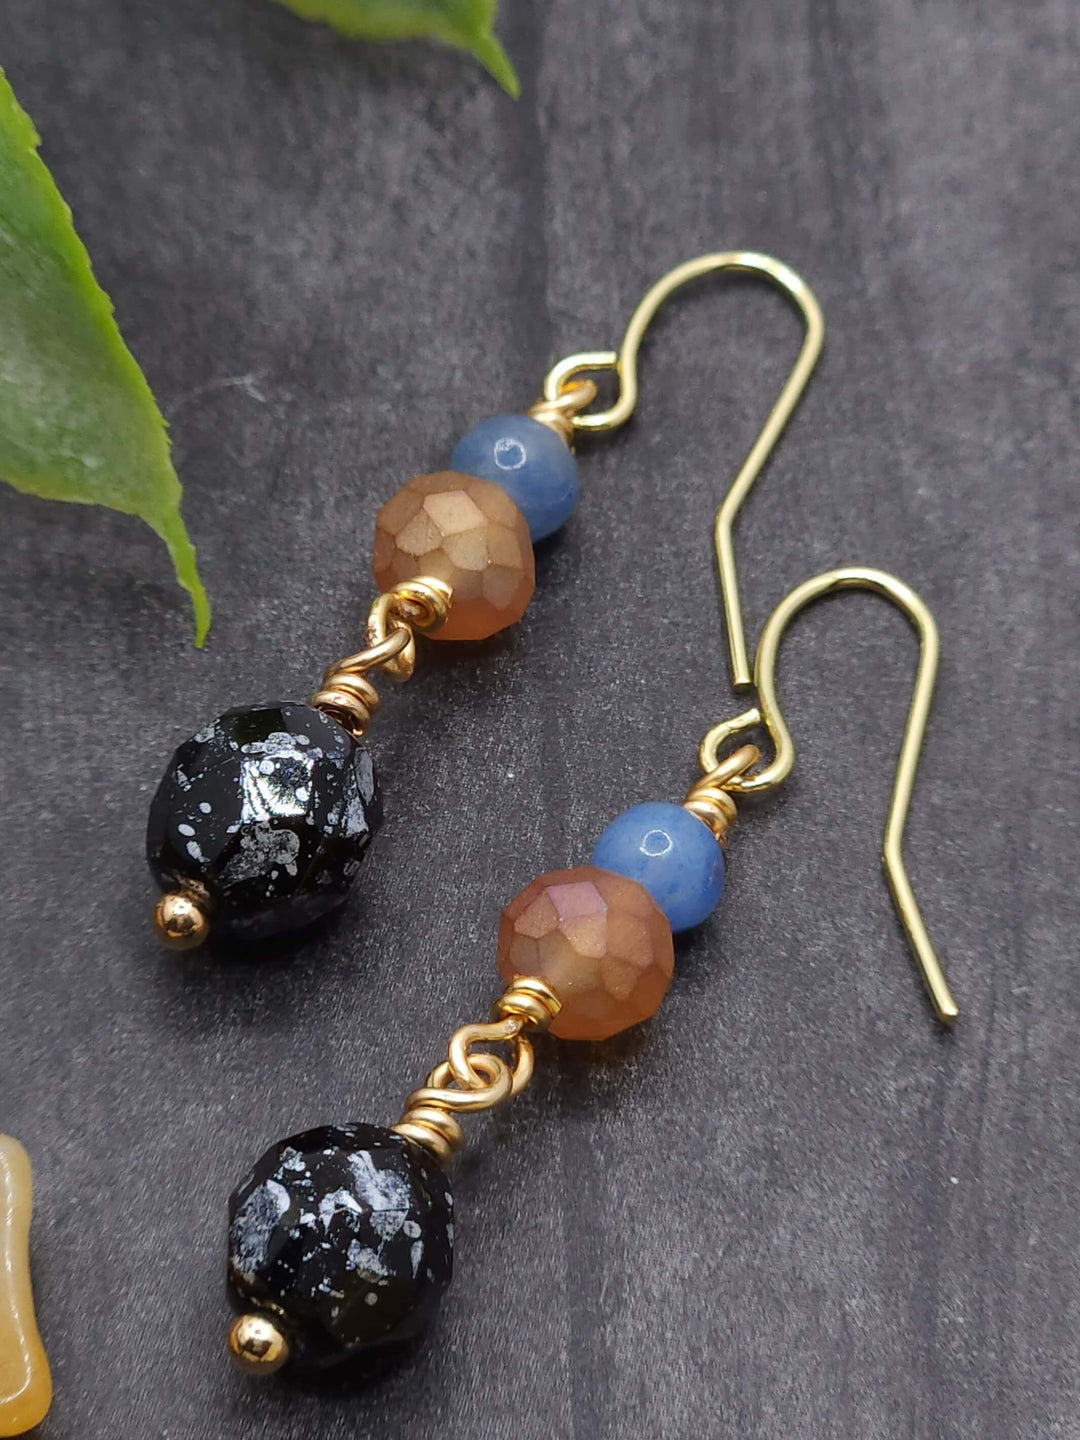  This close-up photo of the American Kestrel earrings highlights the textures of the beads used in the earrings. 